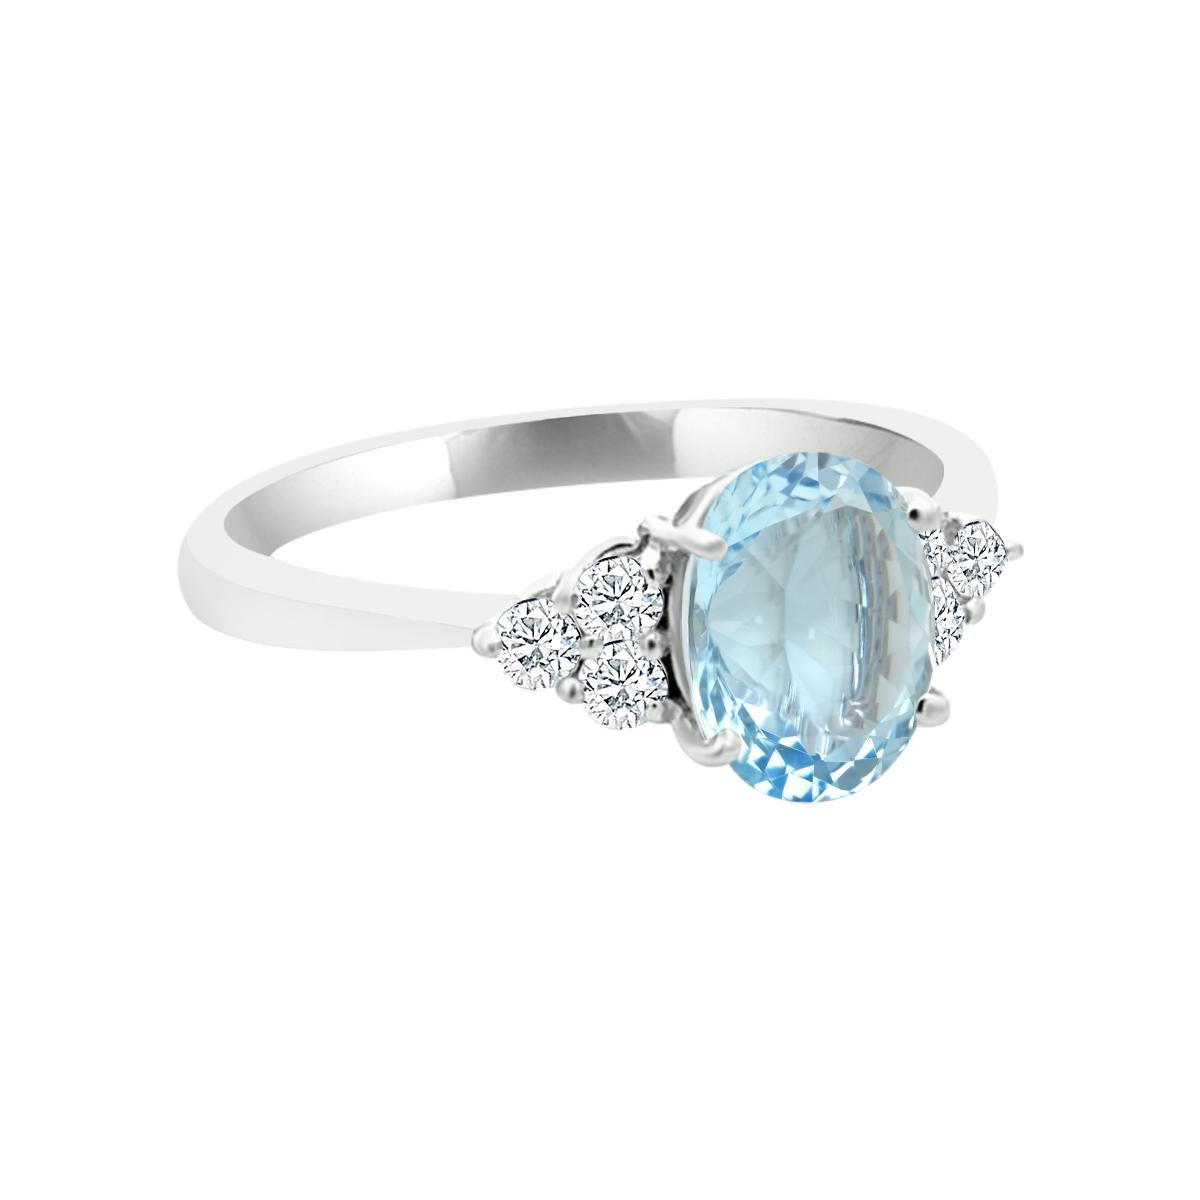 Look At This 14K Oval Cut Aquamarine And Diamond Ring. This dazzling Ring Features An Elegant 8x6mm Aquamarine Gemstone With Beautiful Diamonds Beside It Enhancing The Entire Look.
Aquamarine Will Be A Timeless Addition To Your Collection, You will